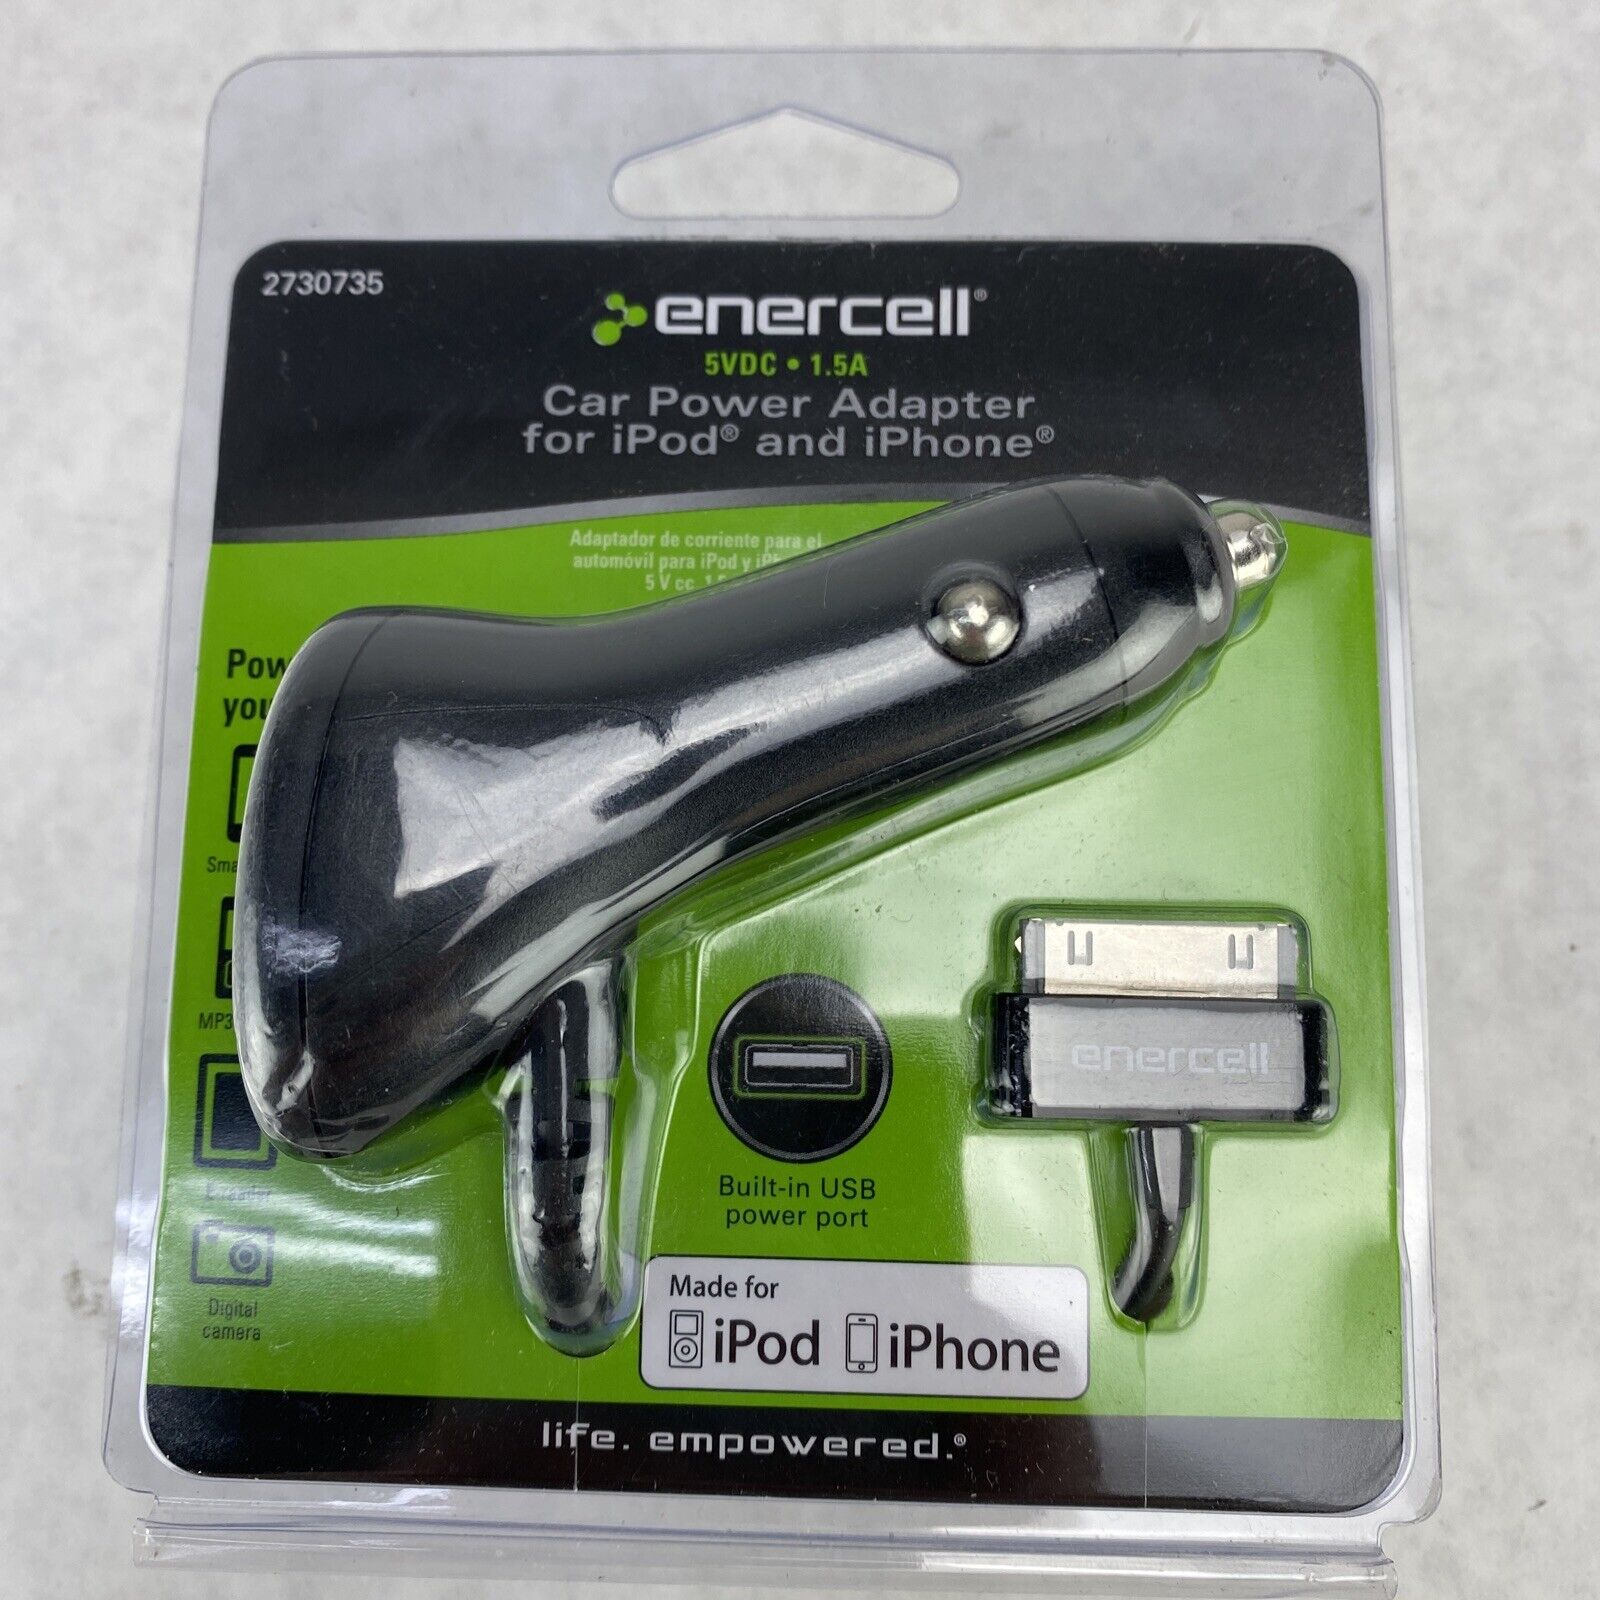 Enercell 2730735 Universal Automobile Power Adapter for iPod and iPhone with USB